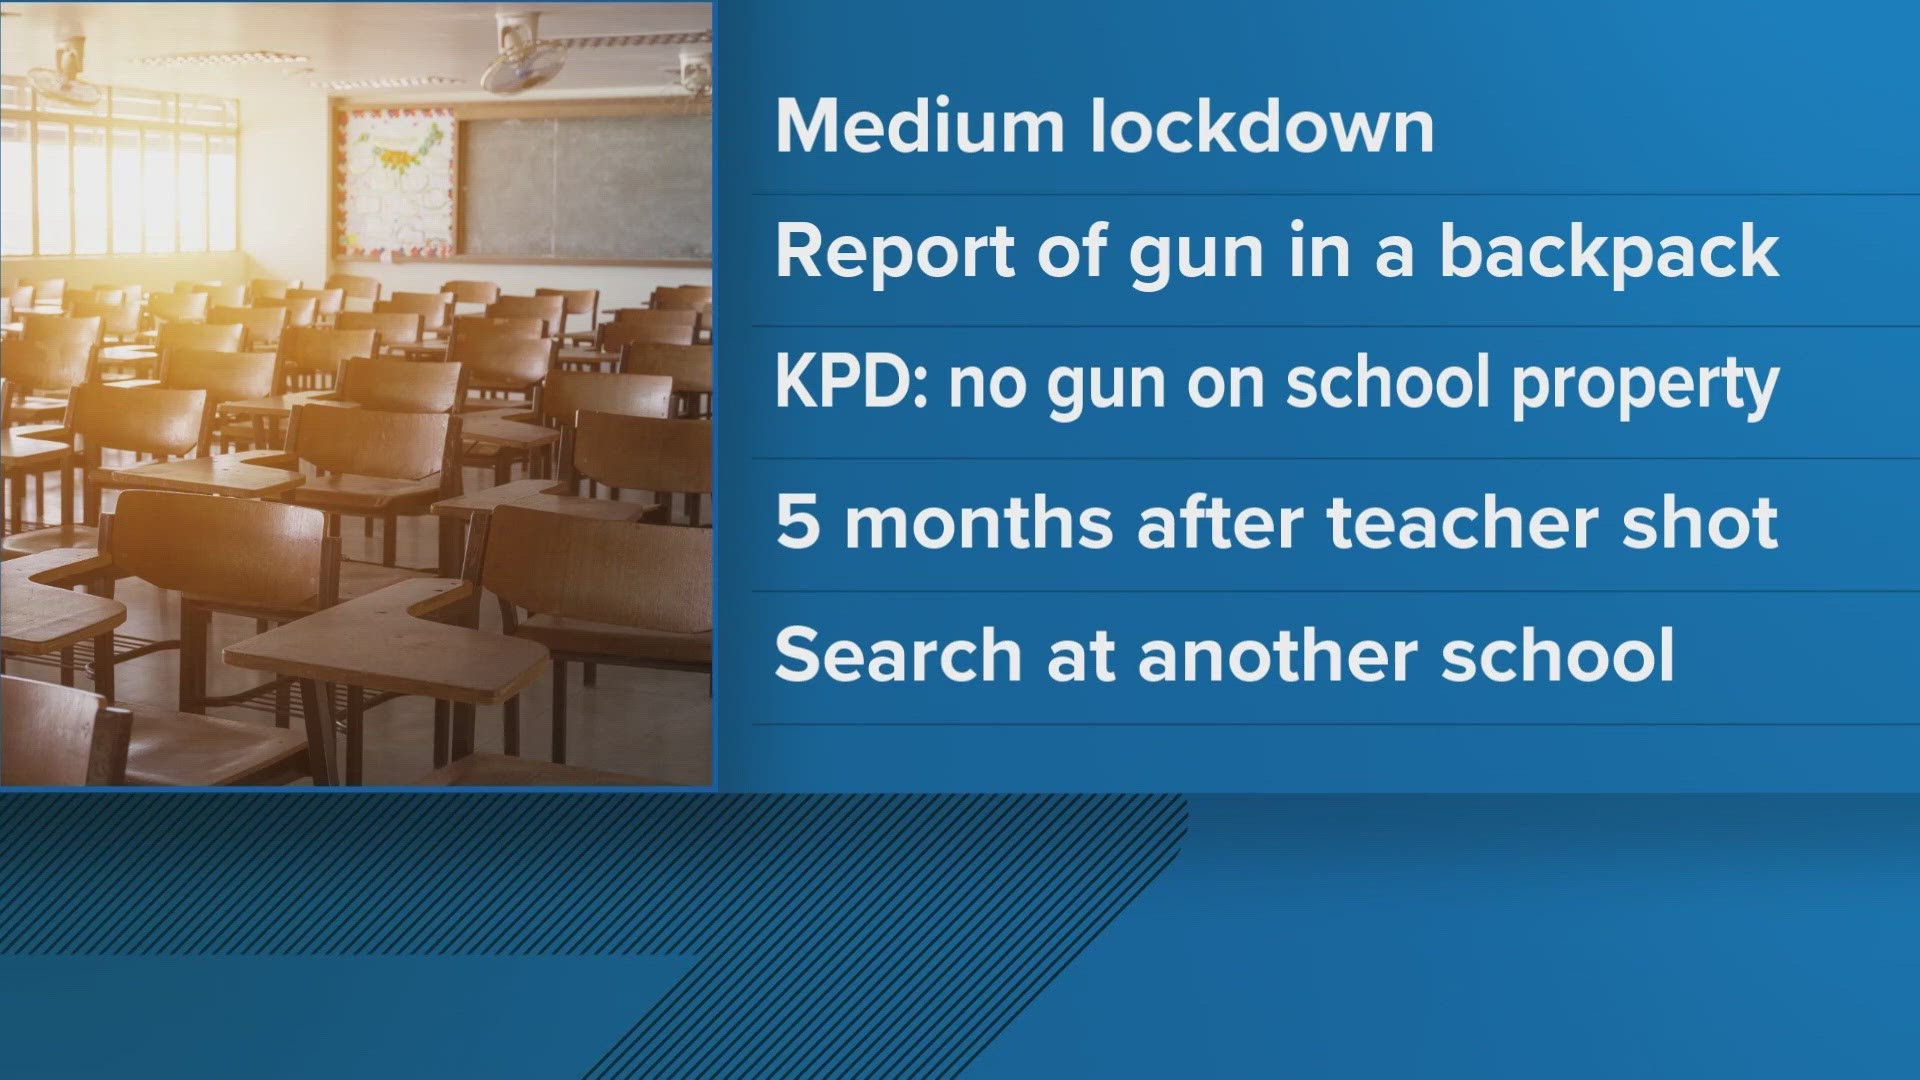 Knoxville Police say there was a report a student possibly had a gun in a backpack. Investigators say there is no indication a gun was on school property.